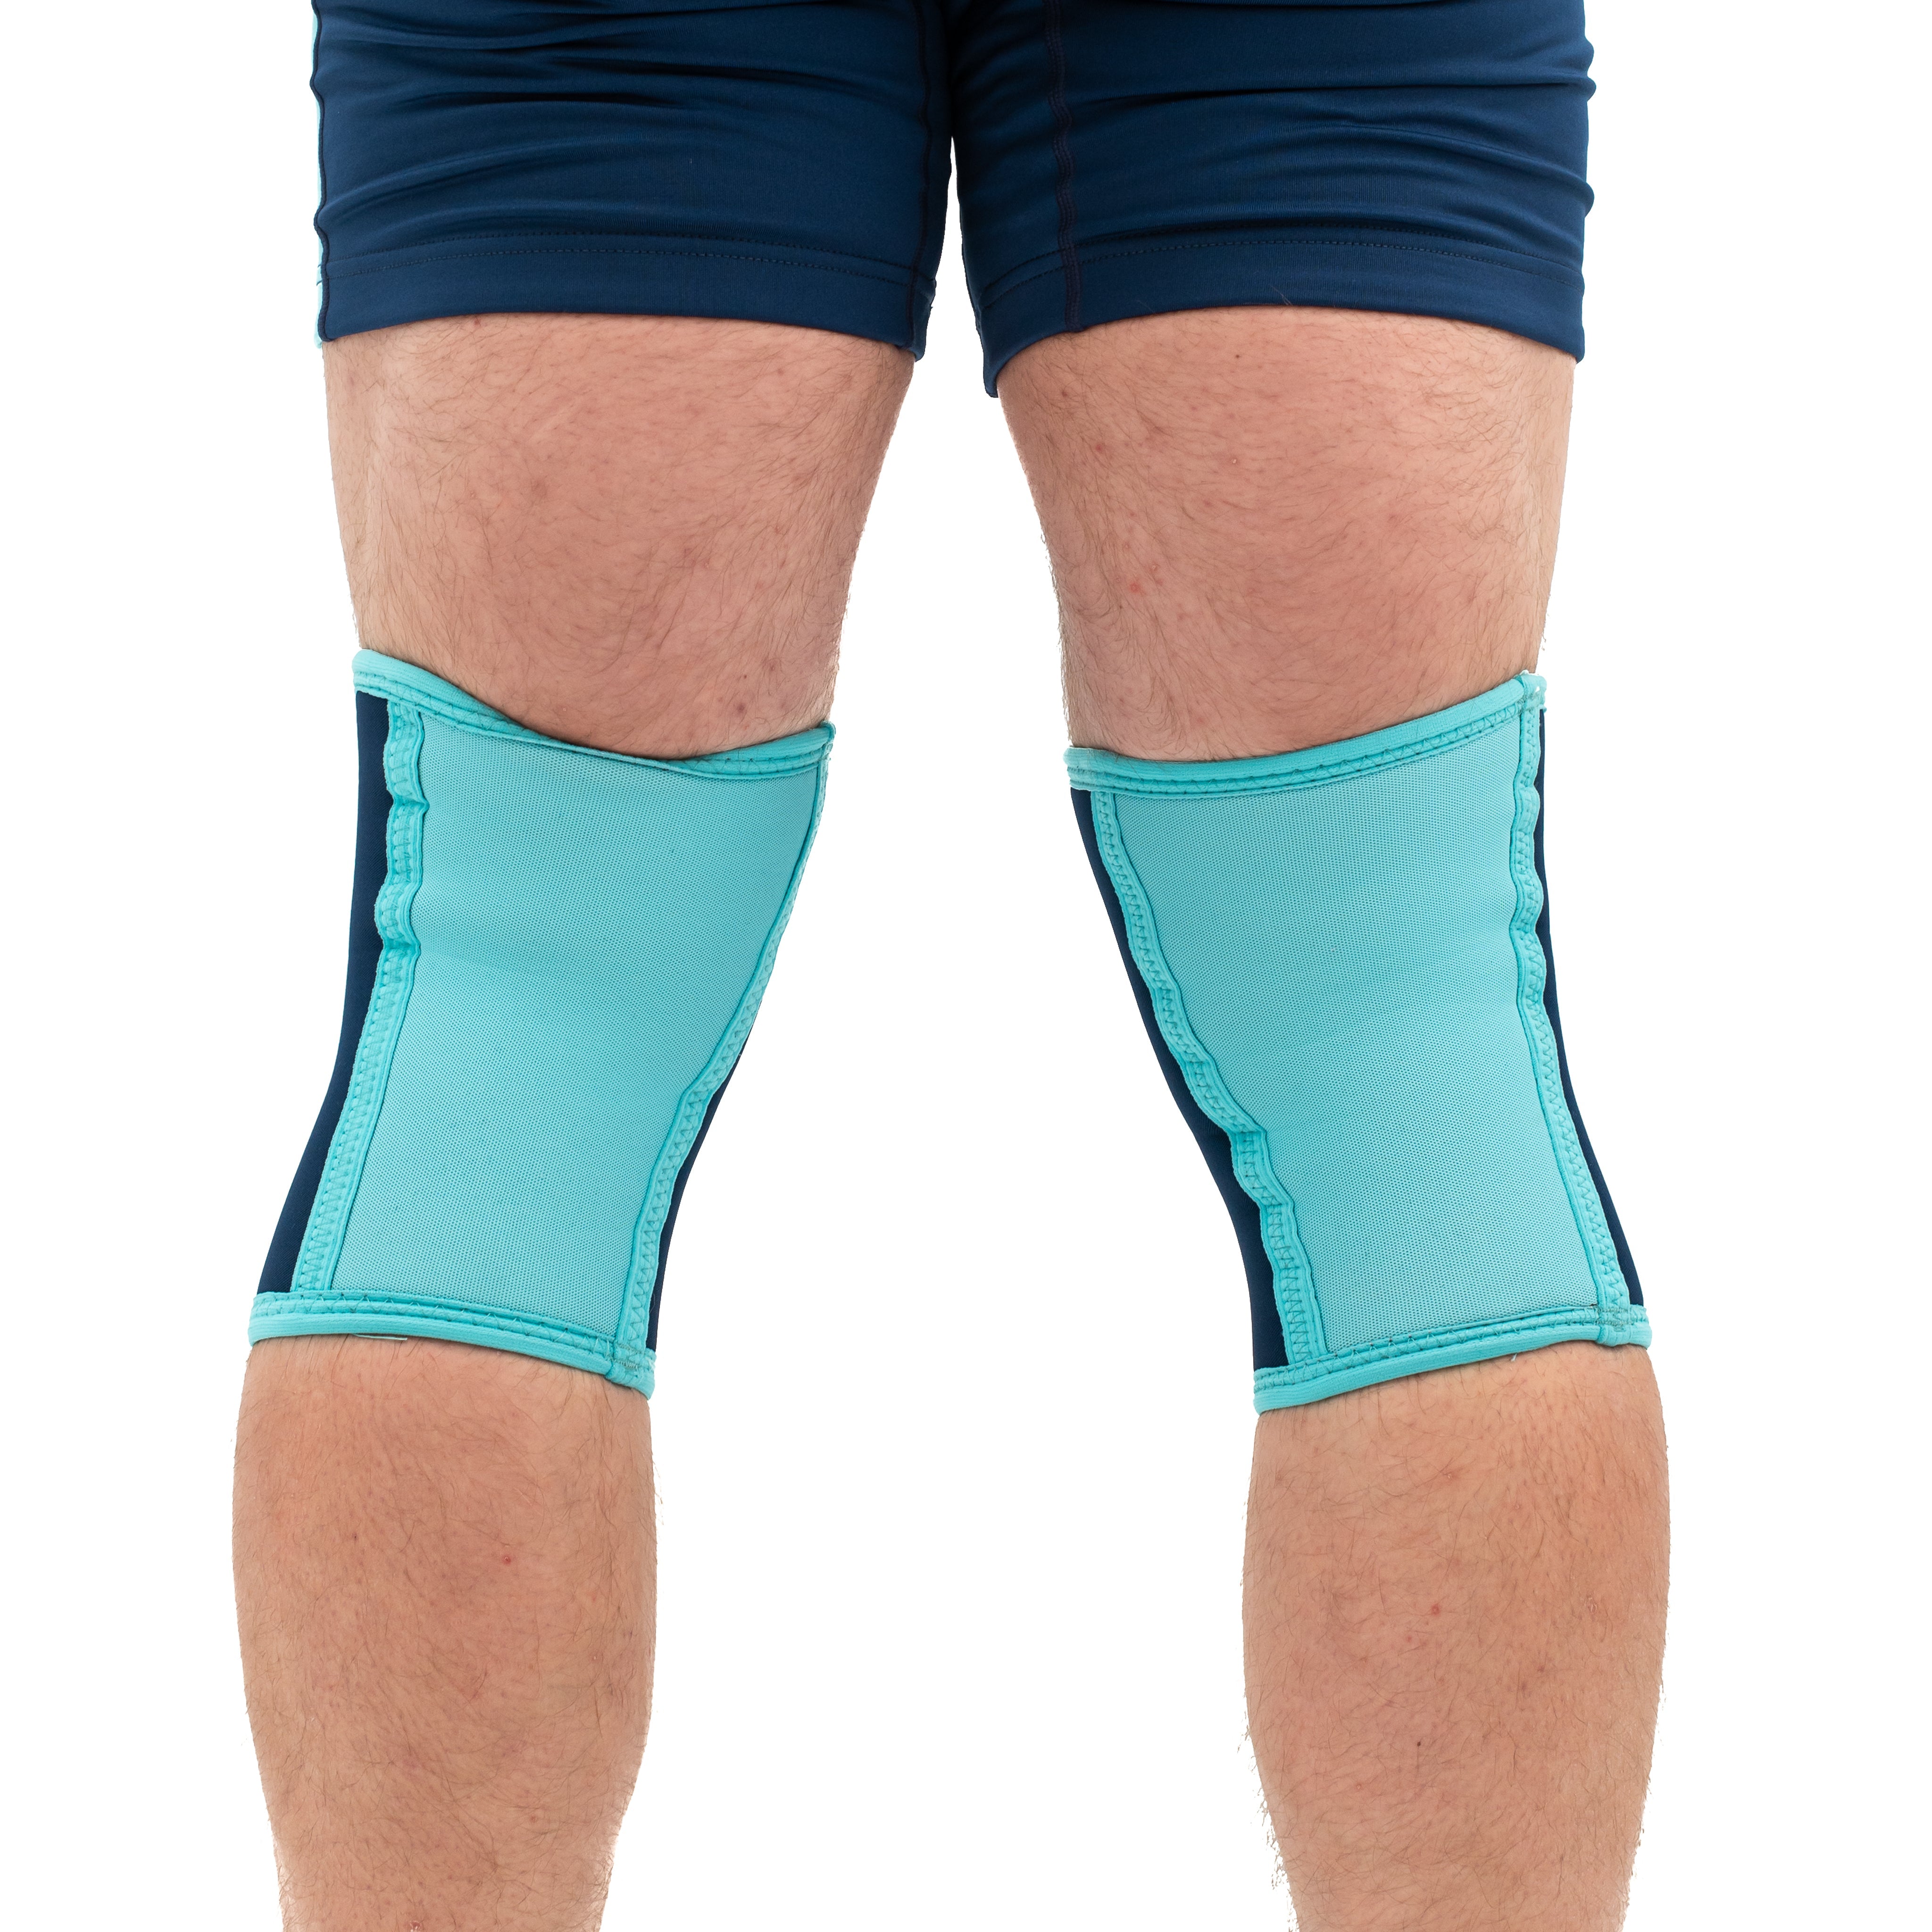 The IPF Approved A7 Iced Stiff knee sleeves are structured with a downward cut panel on the back of the quad and calf to ensure these have the ultimate compression at the knee joint. The A7 CONE Iced Stiff Knee Sleeves are IPF approved and are allowed in all IPF competitions and affiliate federations like the European Powerlifting Federation and all federations across Europe. A7 Iced Stiff Sleeves knee sleeves are IPF Approved Kit. A7 UK shipping to UK and Europe.